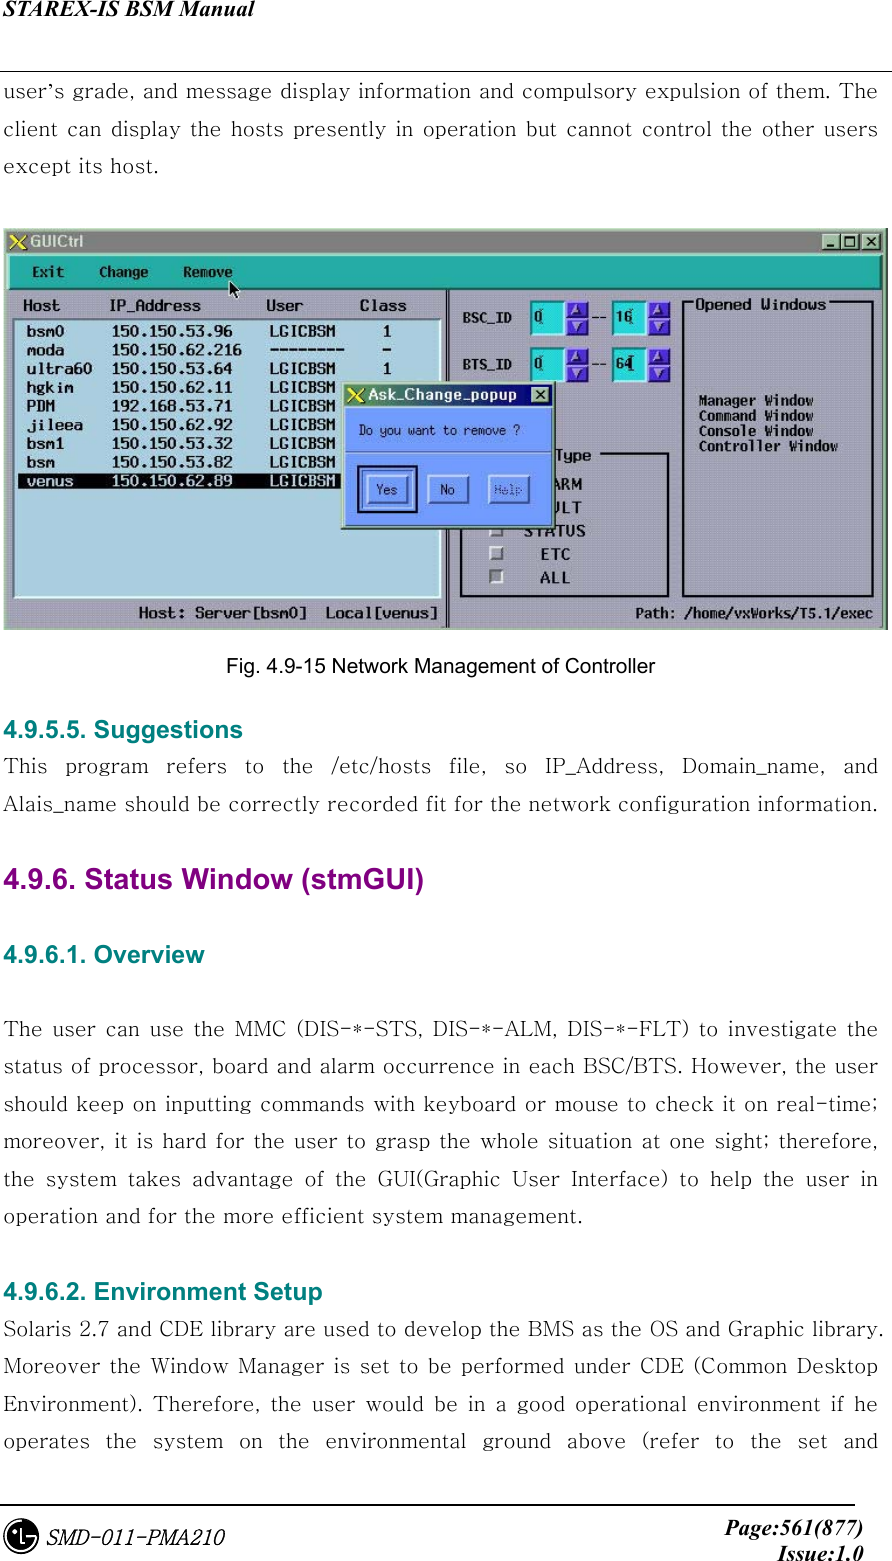 STAREX-IS BSM Manual     Page:561(877)Issue:1.0SMD-011-PMA210 user’s grade, and message display information and compulsory expulsion of them. The client can display the hosts presently in operation but cannot control the  other users except its host.   Fig. 4.9-15 Network Management of Controller 4.9.5.5. Suggestions This  program  refers  to  the  /etc/hosts  file,  so  IP_Address,  Domain_name,  and Alais_name should be correctly recorded fit for the network configuration information.  4.9.6. Status Window (stmGUI)  4.9.6.1. Overview  The  user  can  use  the  MMC  (DIS-*-STS, DIS-*-ALM, DIS-*-FLT)  to  investigate  the status of processor, board and alarm occurrence in each BSC/BTS. However, the user should keep on inputting commands with keyboard or mouse to check it on real-time; moreover, it is hard for the user to grasp the whole situation at one sight; therefore, the  system  takes  advantage  of  the  GUI(Graphic  User  Interface)  to  help  the  user  in operation and for the more efficient system management.  4.9.6.2. Environment Setup Solaris 2.7 and CDE library are used to develop the BMS as the OS and Graphic library. Moreover the Window Manager is set to be performed under CDE (Common Desktop Environment).  Therefore,  the  user  would  be  in  a  good  operational  environment  if  he operates the system on the environmental ground above (refer to the set and 